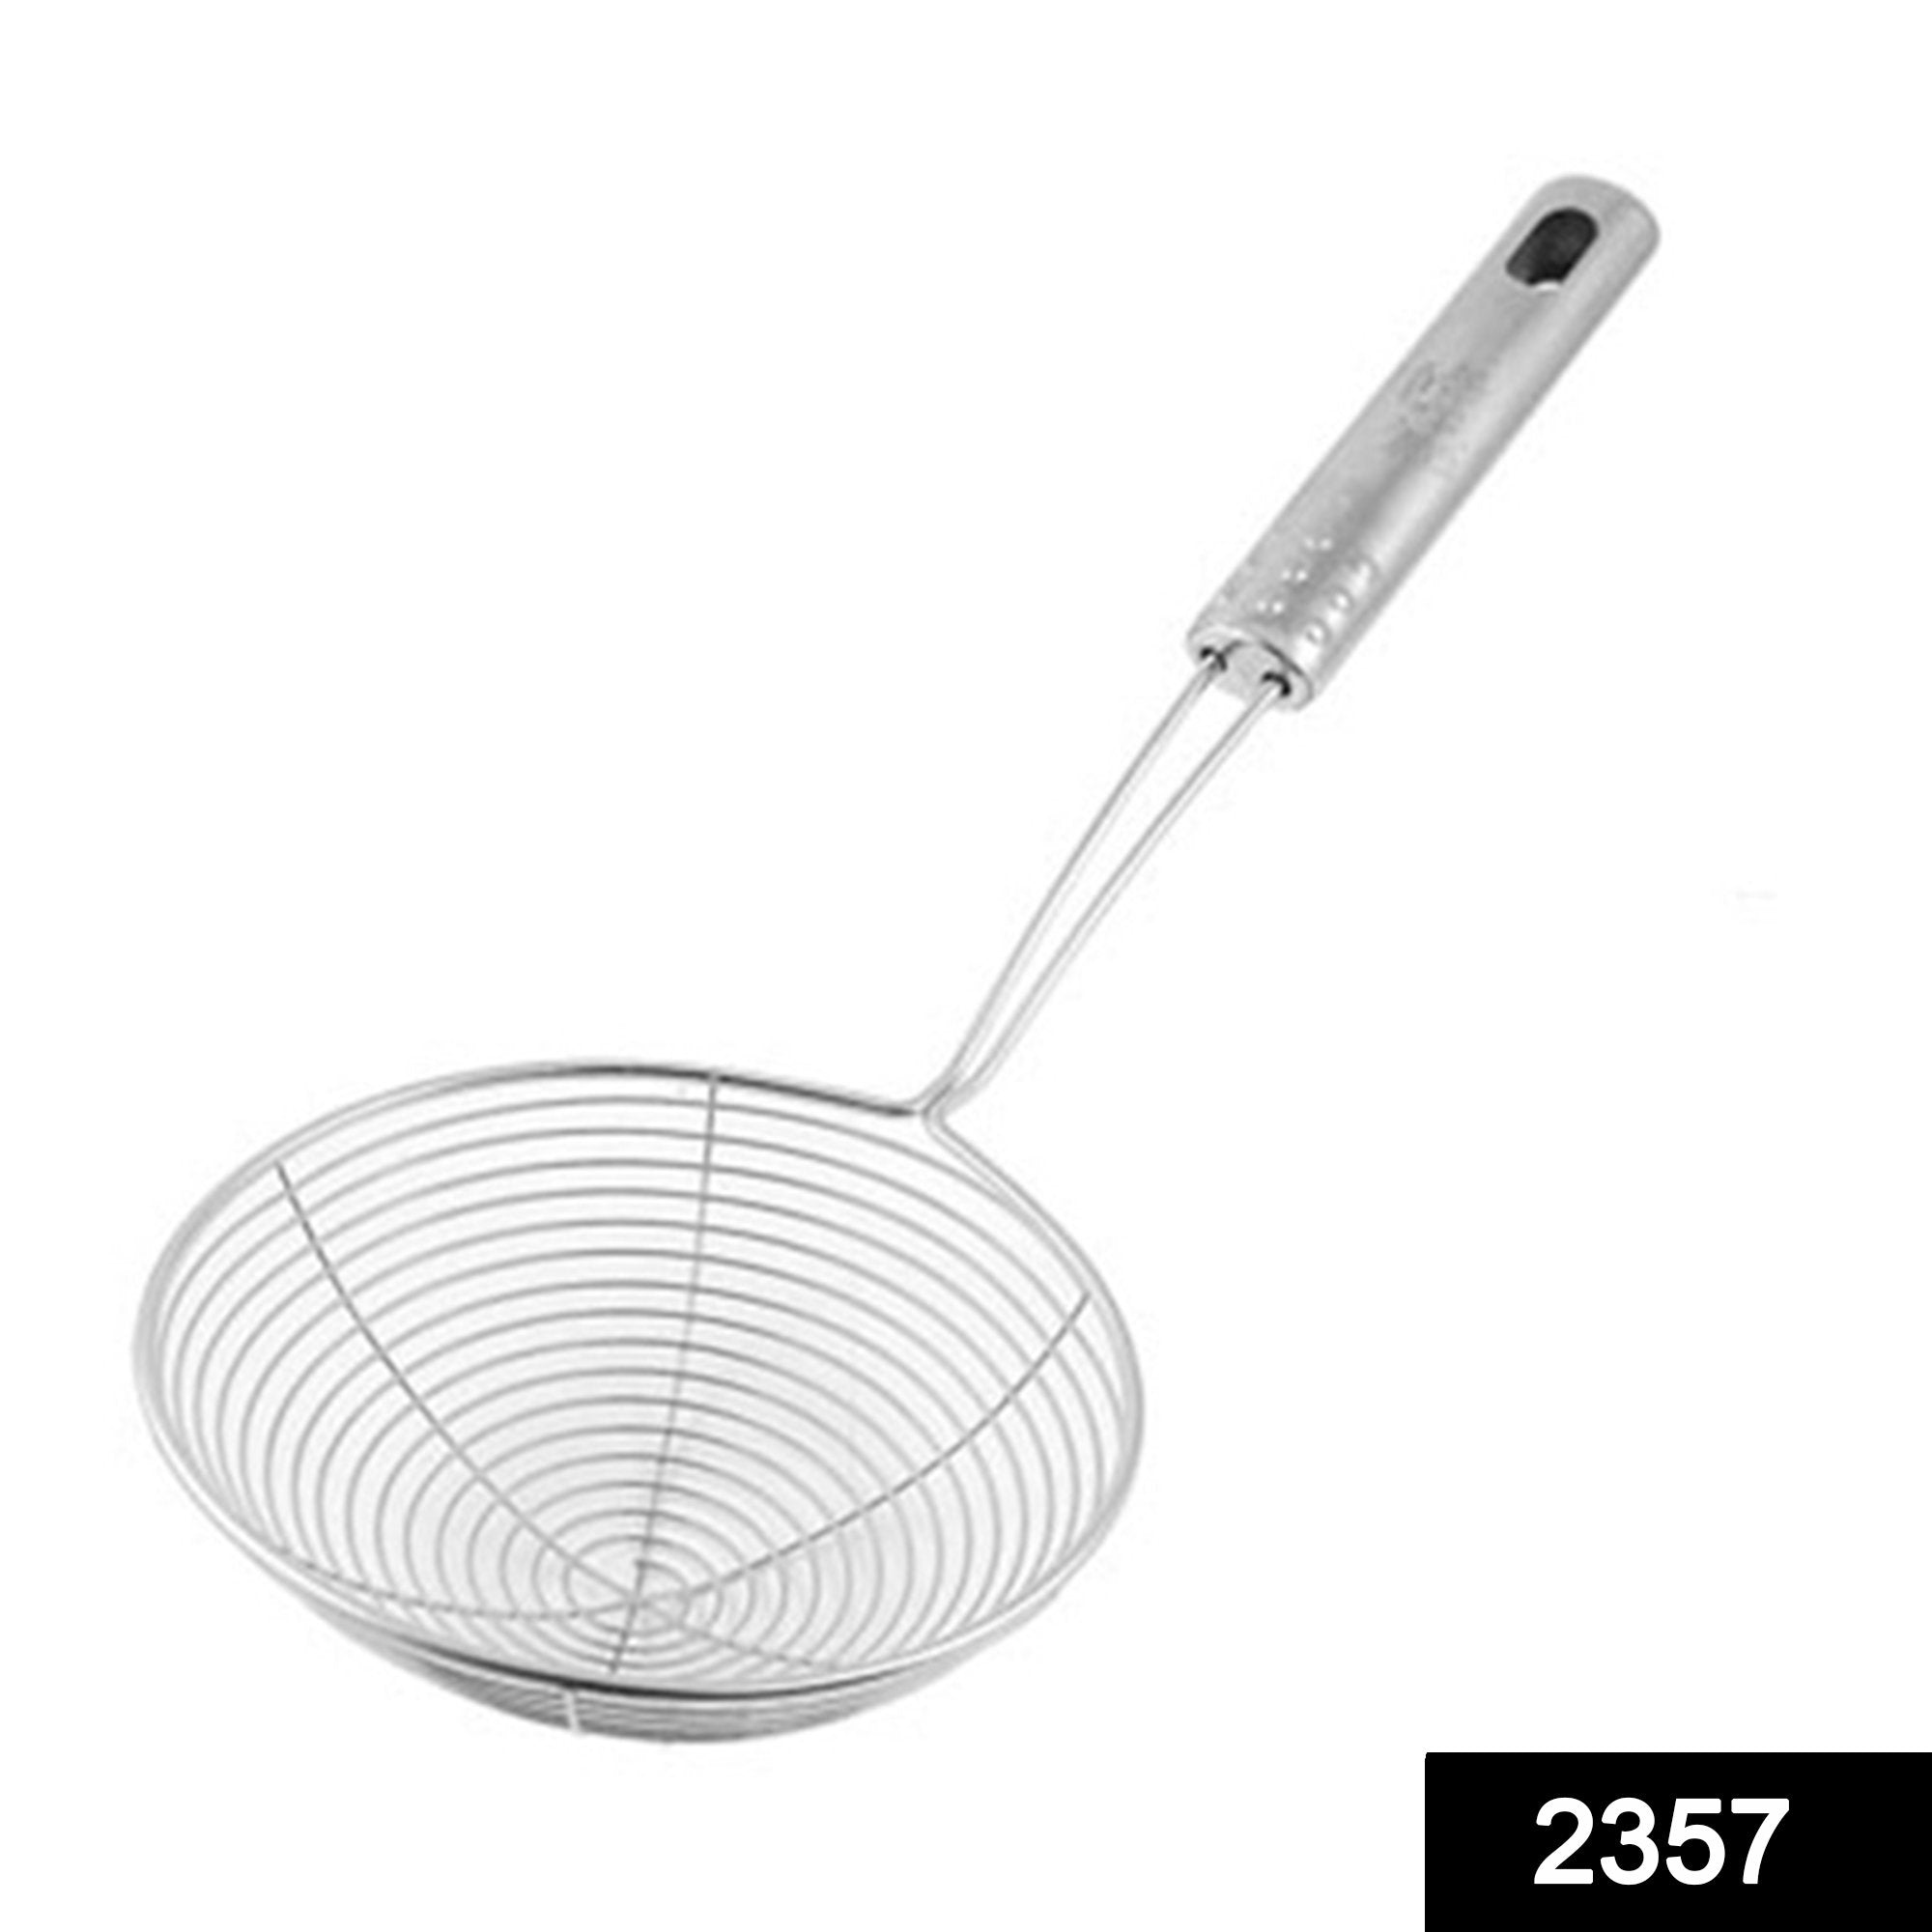 2357 Round Stainless Steel Deep Fry /Mesh Strainer - SkyShopy